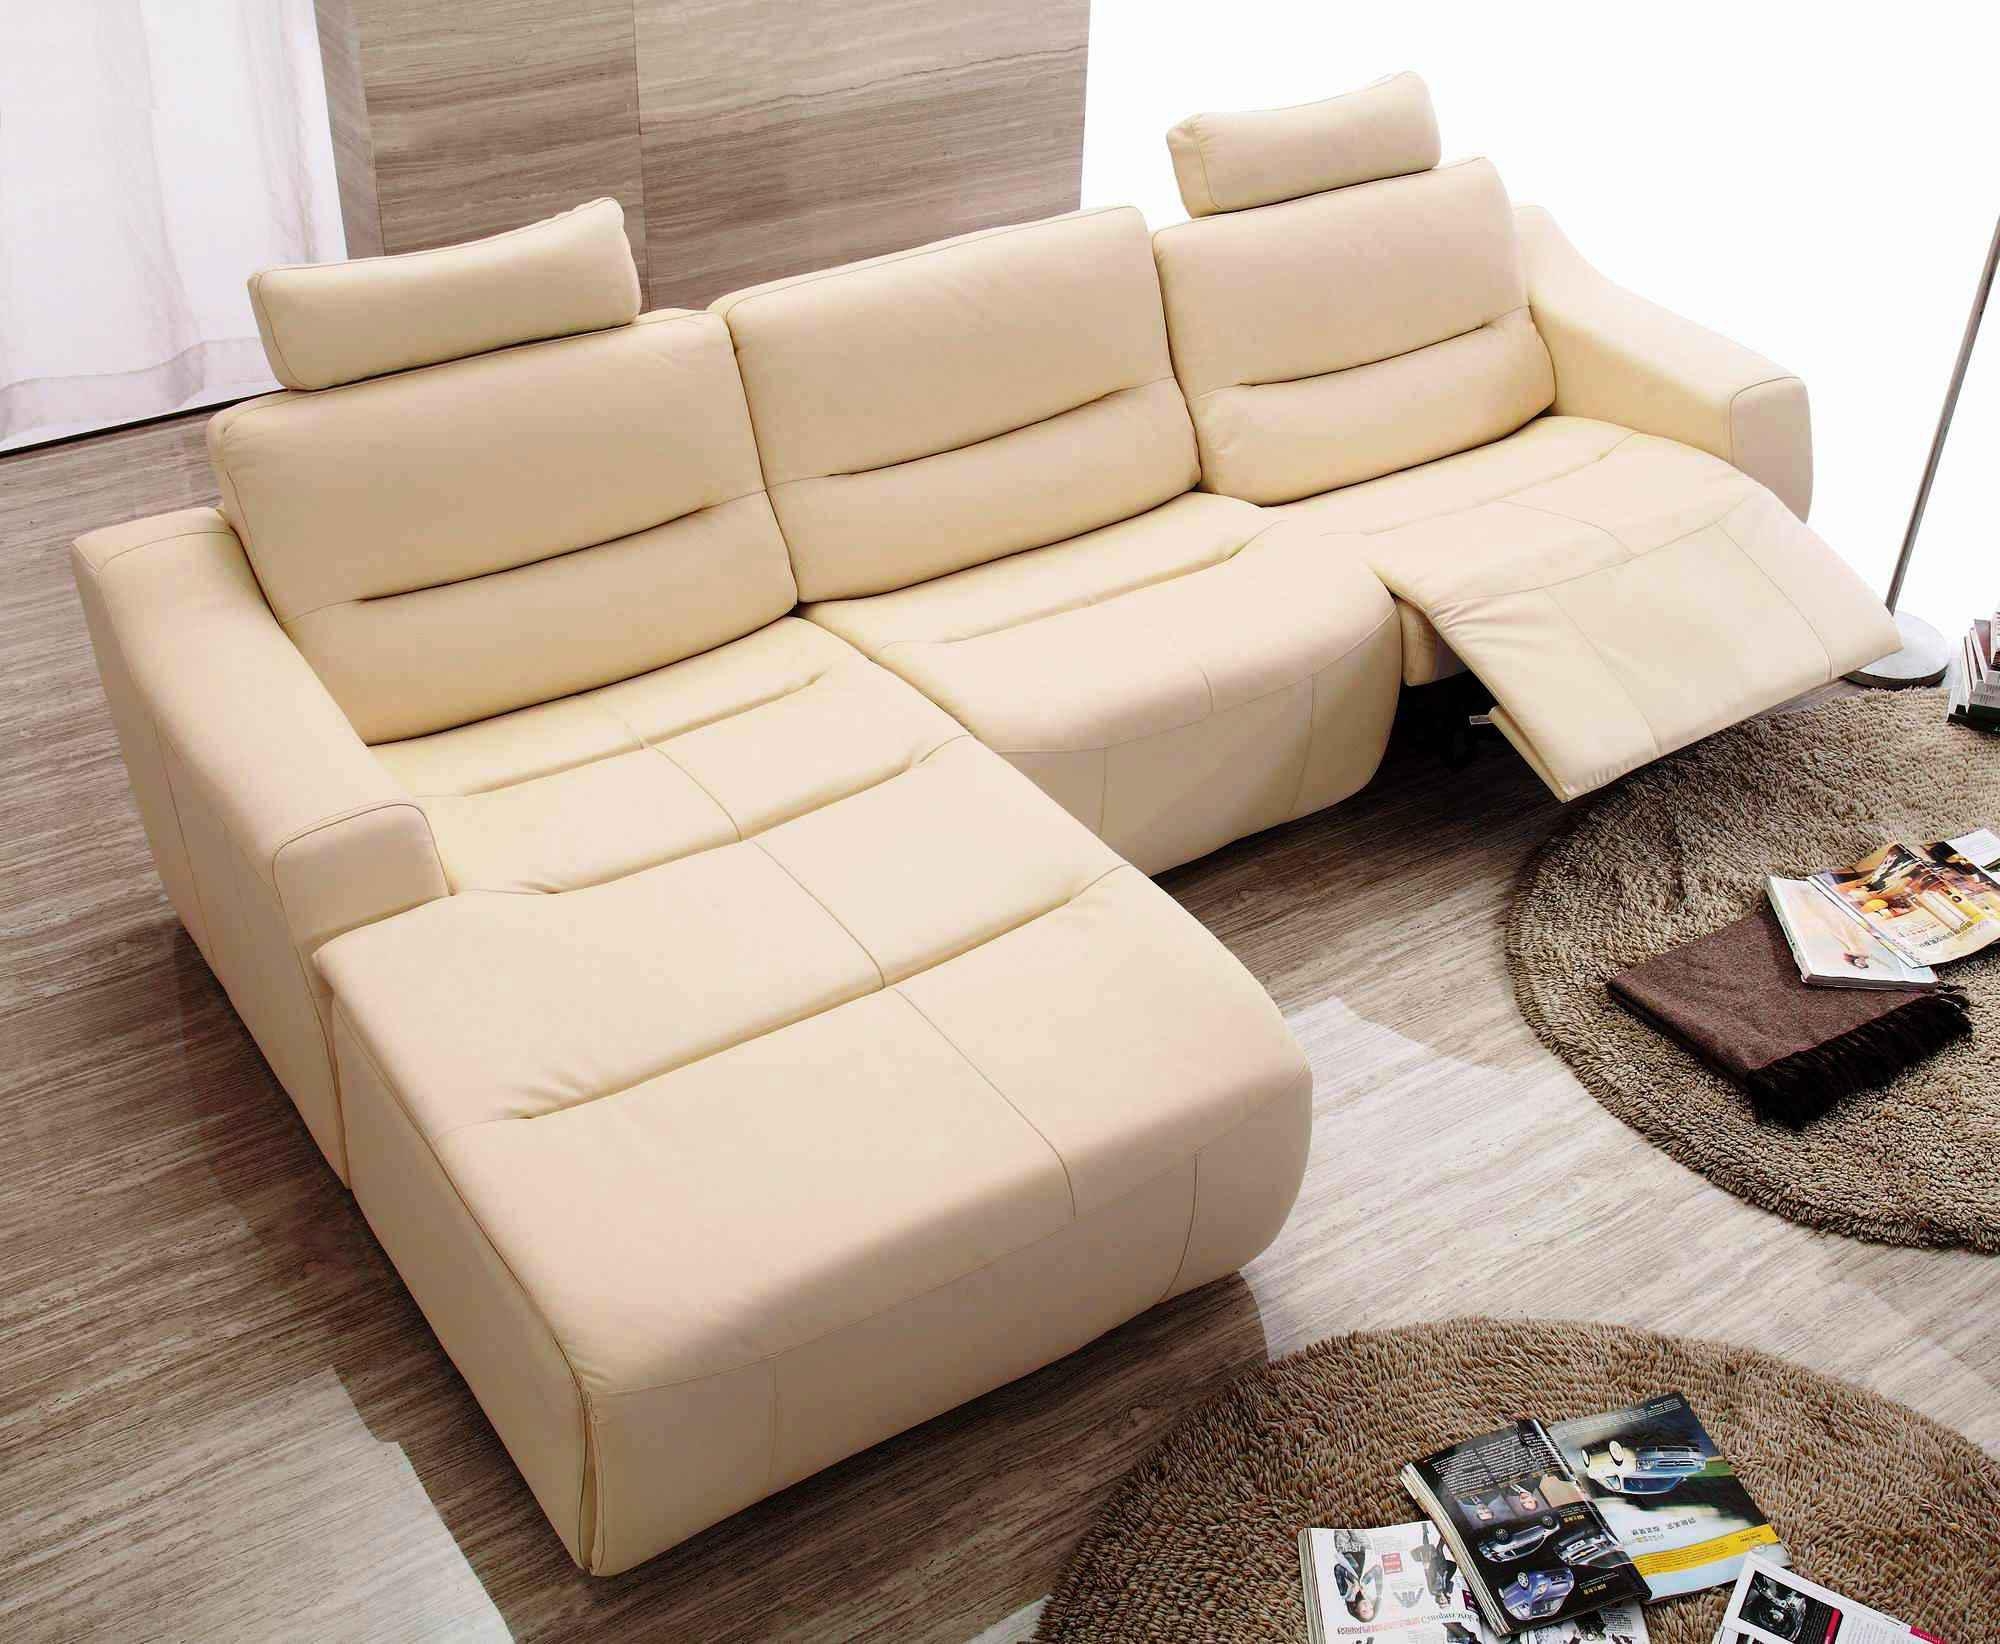 Most Comfortable Sectional Sofa, Most Comfortable Sectional Sofa Brands